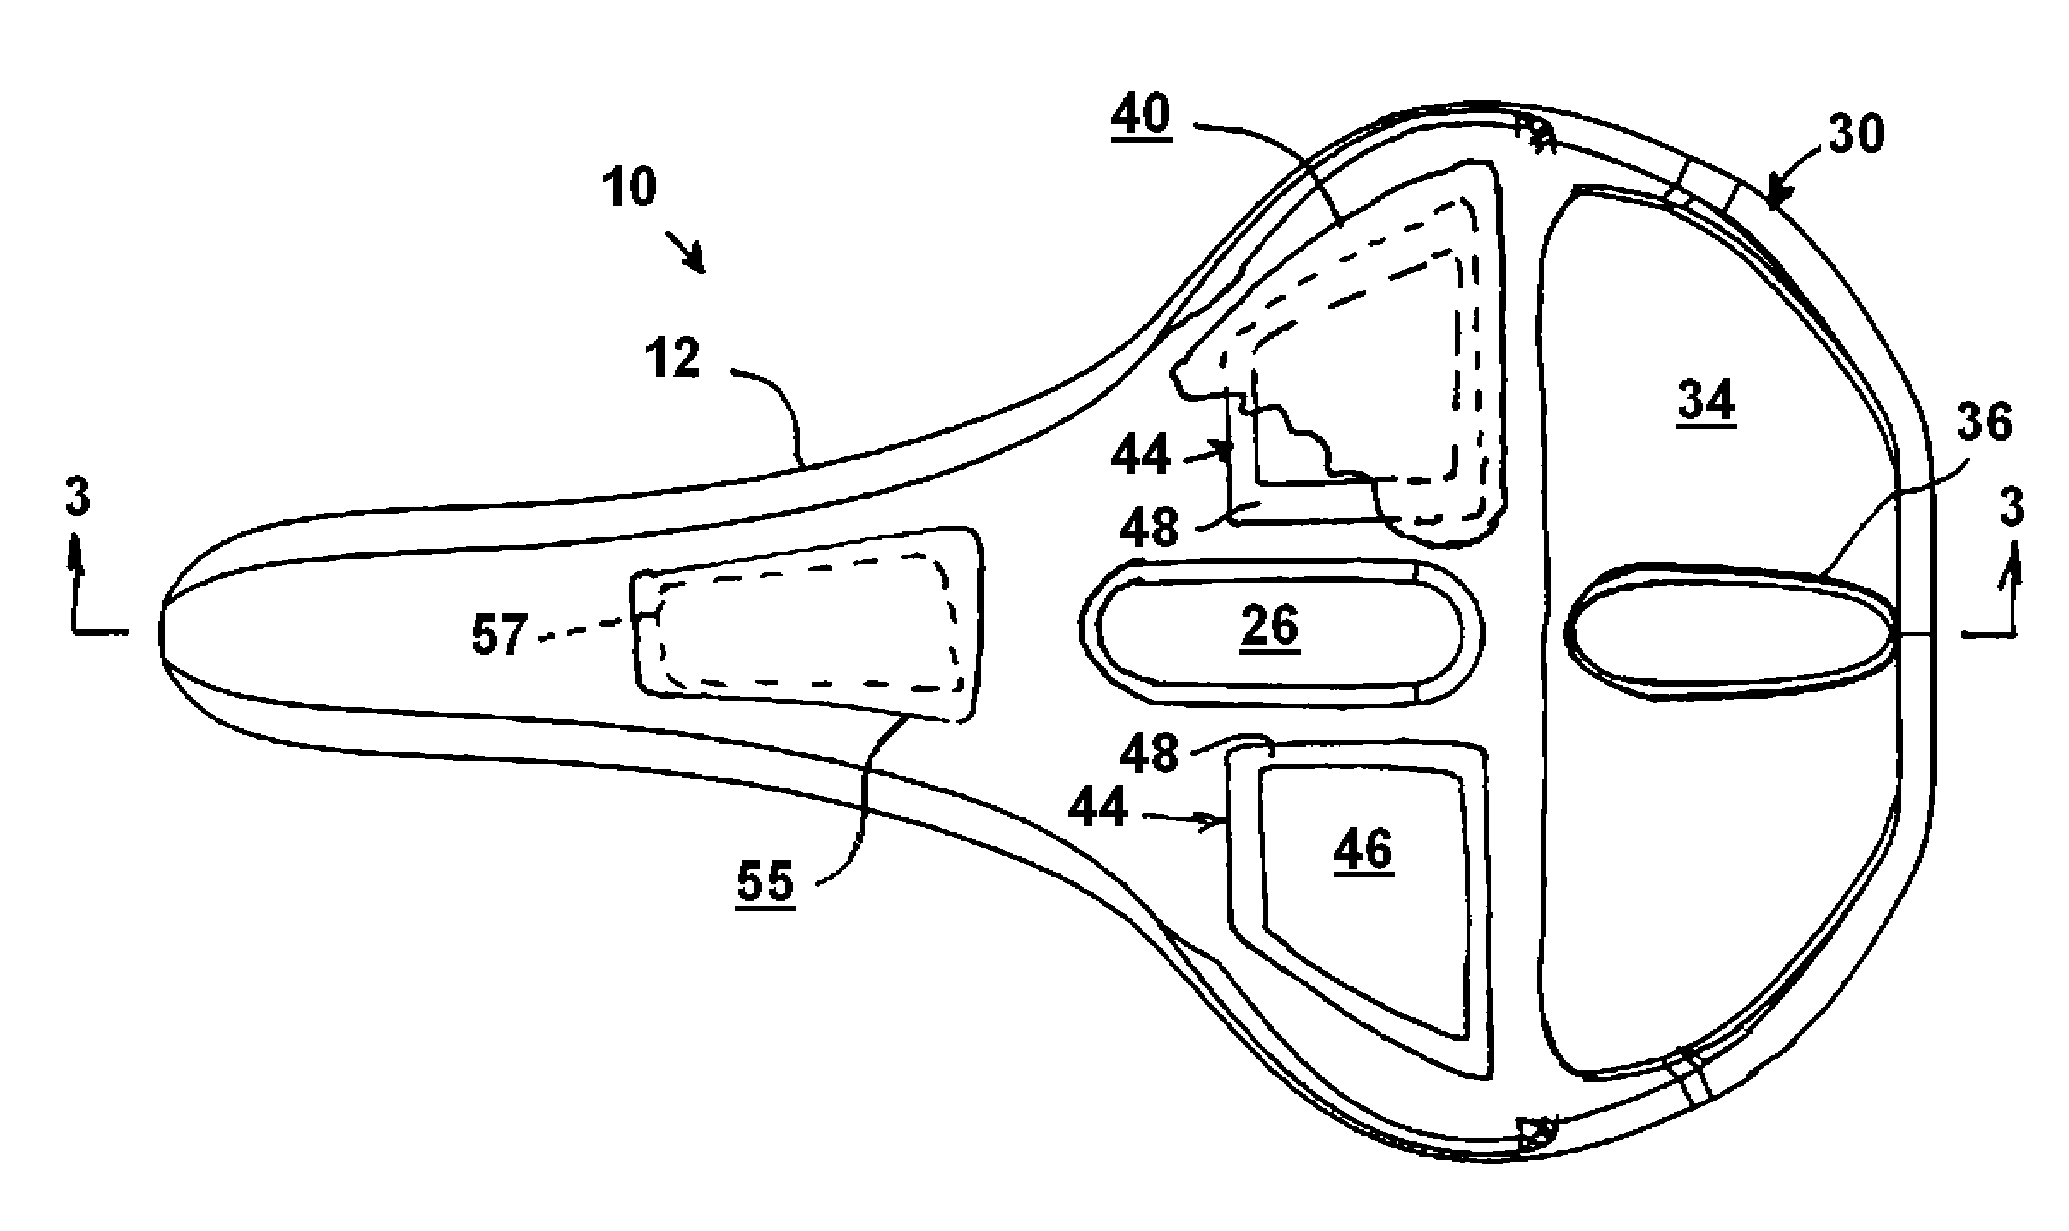 Bicycle Seat for Protecting Ischial Tuberosities